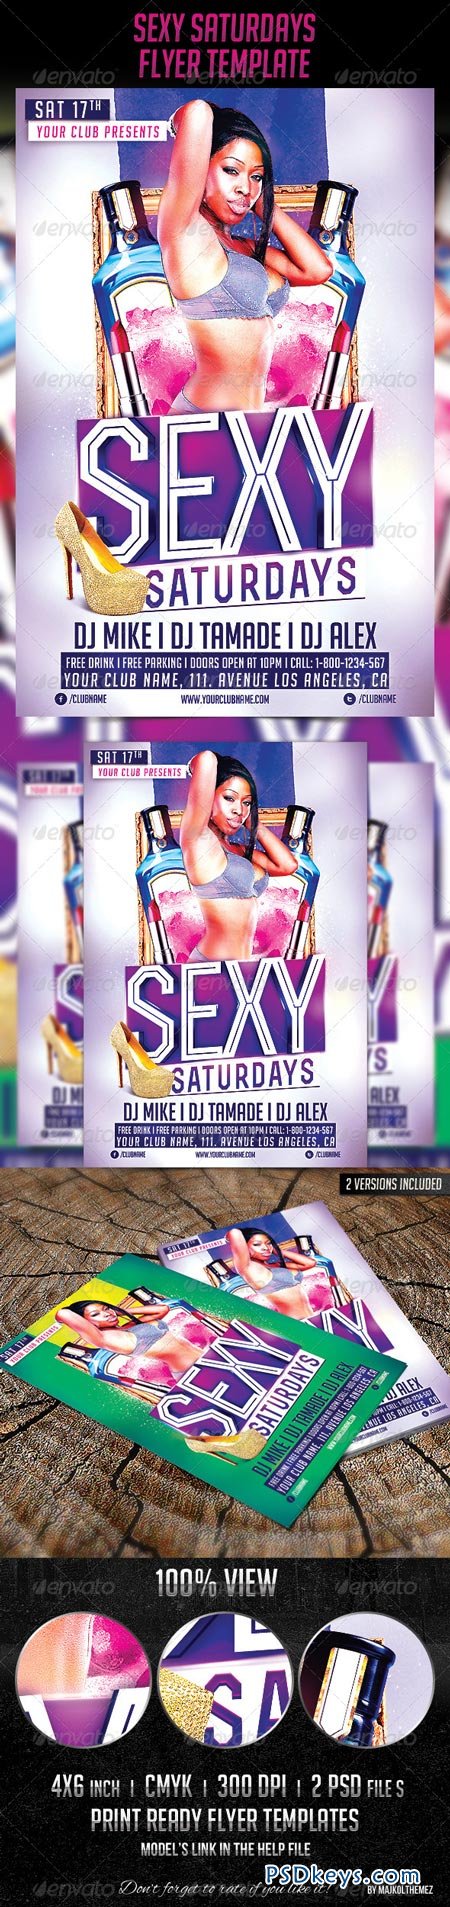 Sexy Saturdays Party Flyer Template 6533815